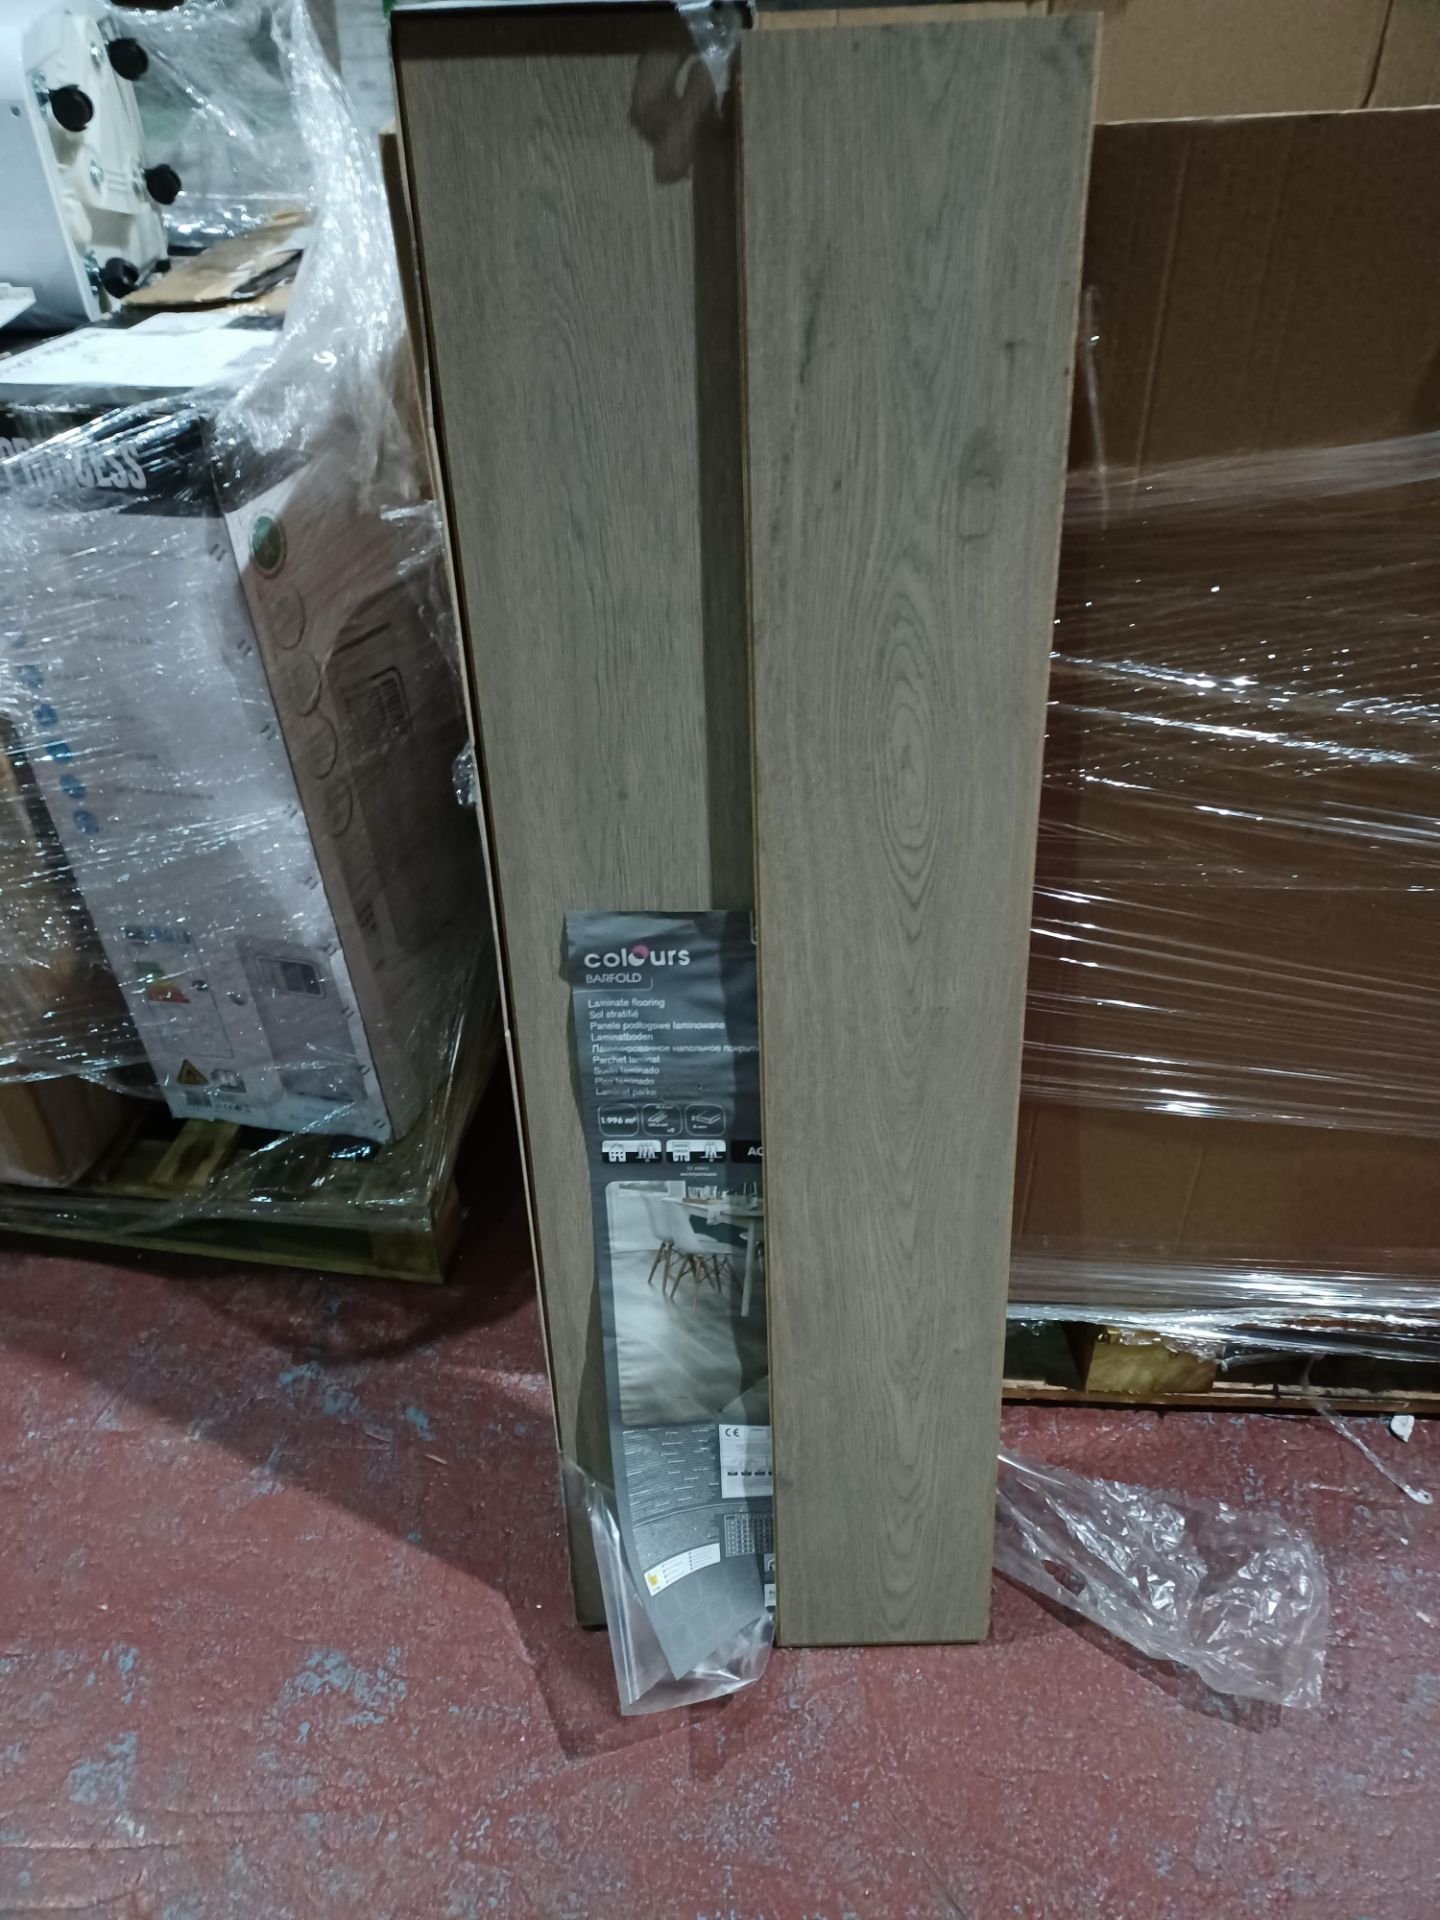 12 x PACKS OF BARFOLD CLICK FITTING LAMINATE FLOORING. EACH PACK CONTAINS 1.996m2 GIVING THIS LOT